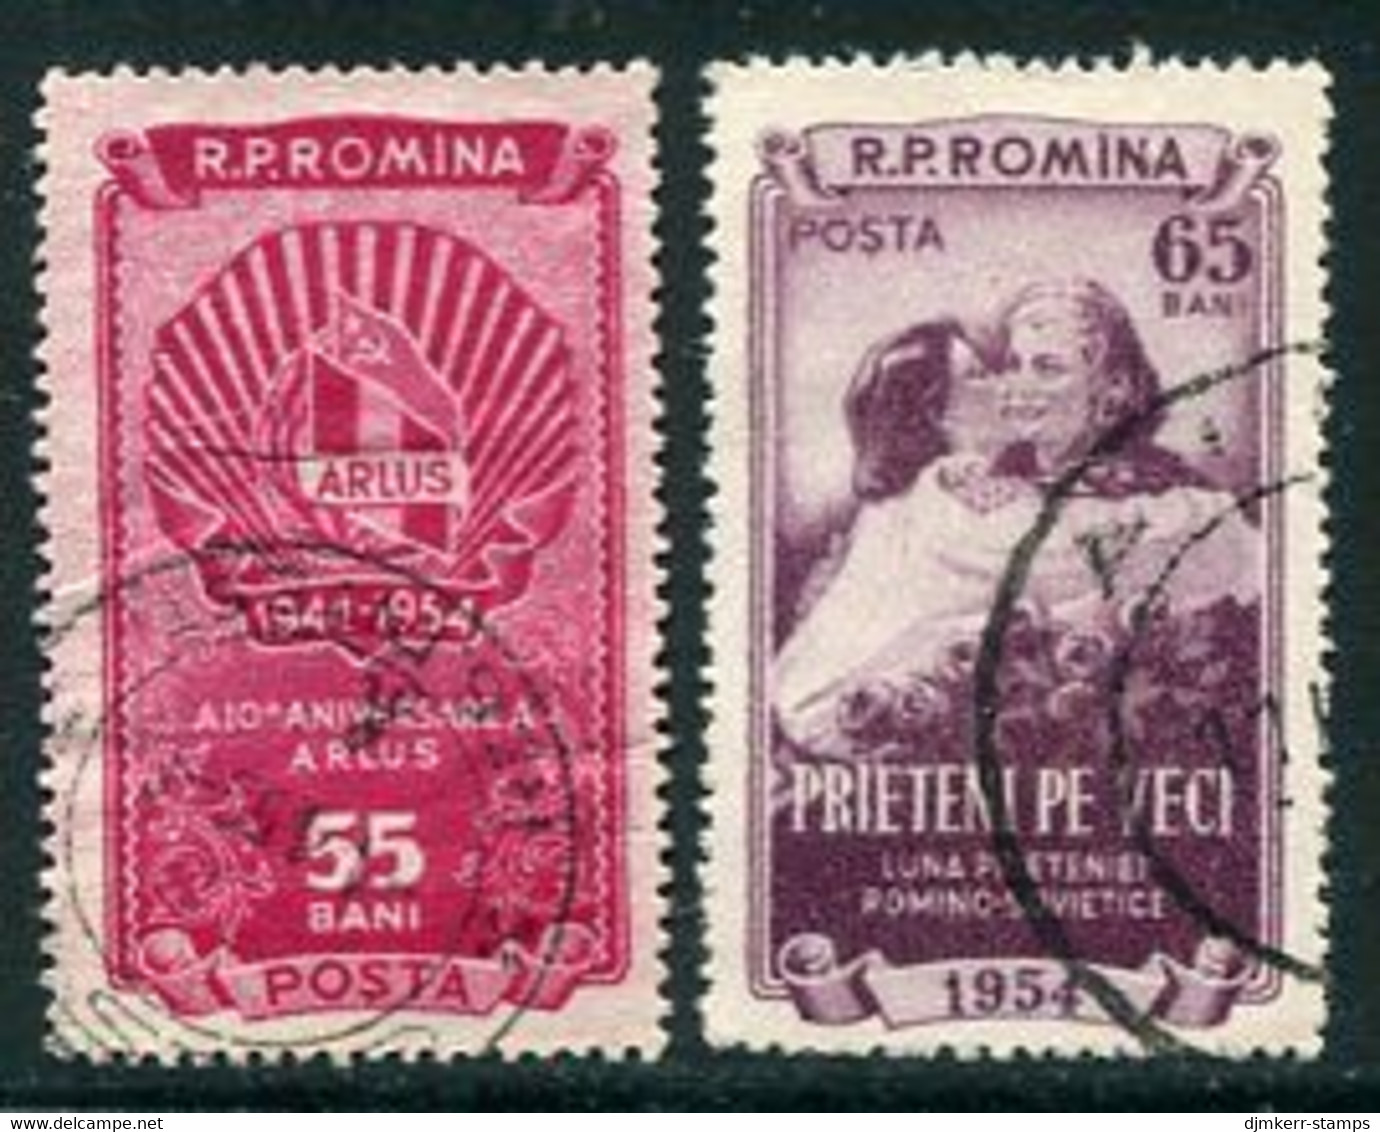 ROMANIA 1954 Romanian-Soviet Friendship Month Used,  Michel 1492-93 - Used Stamps